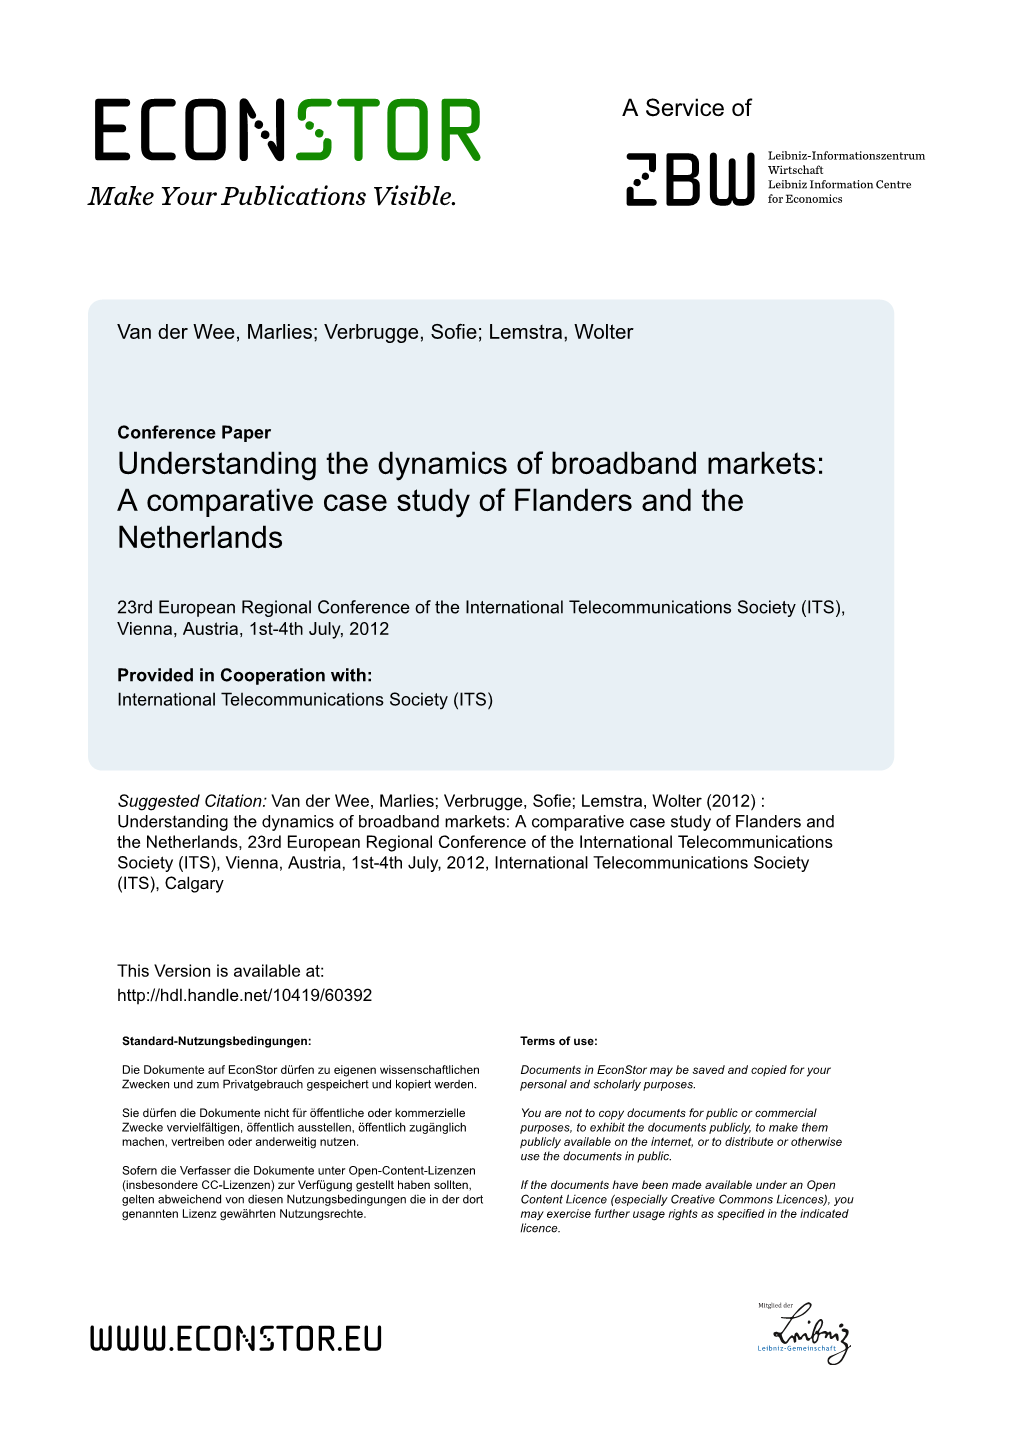 Understanding the Dynamics of Broadband Markets: a Comparative Case Study of Flanders and the Netherlands